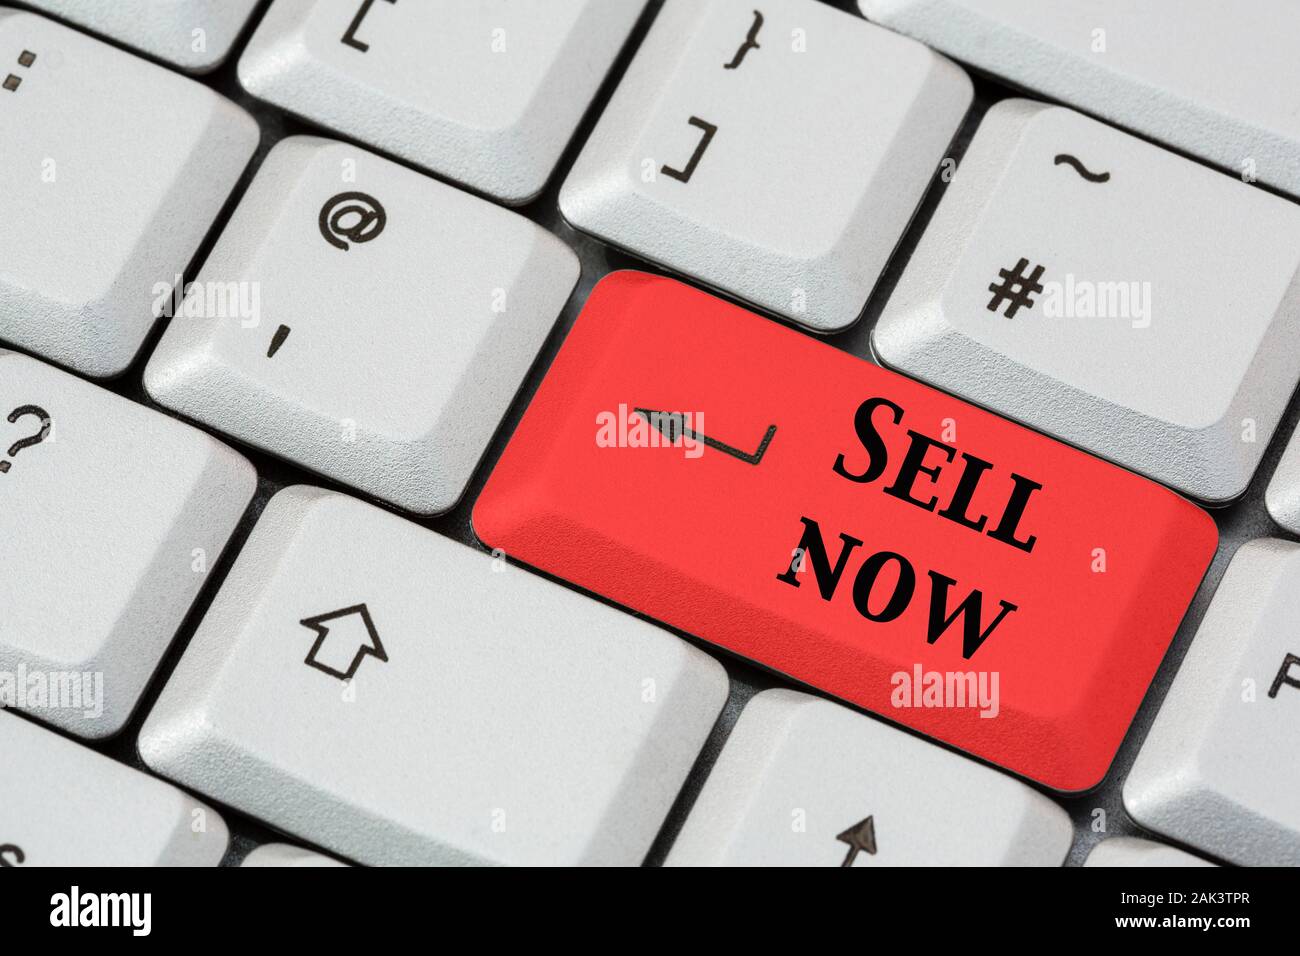 A keyboard with Sell now written in black lettering on a red enter key. Investing investment financial stock market concept. England, UK, Britain Stock Photo